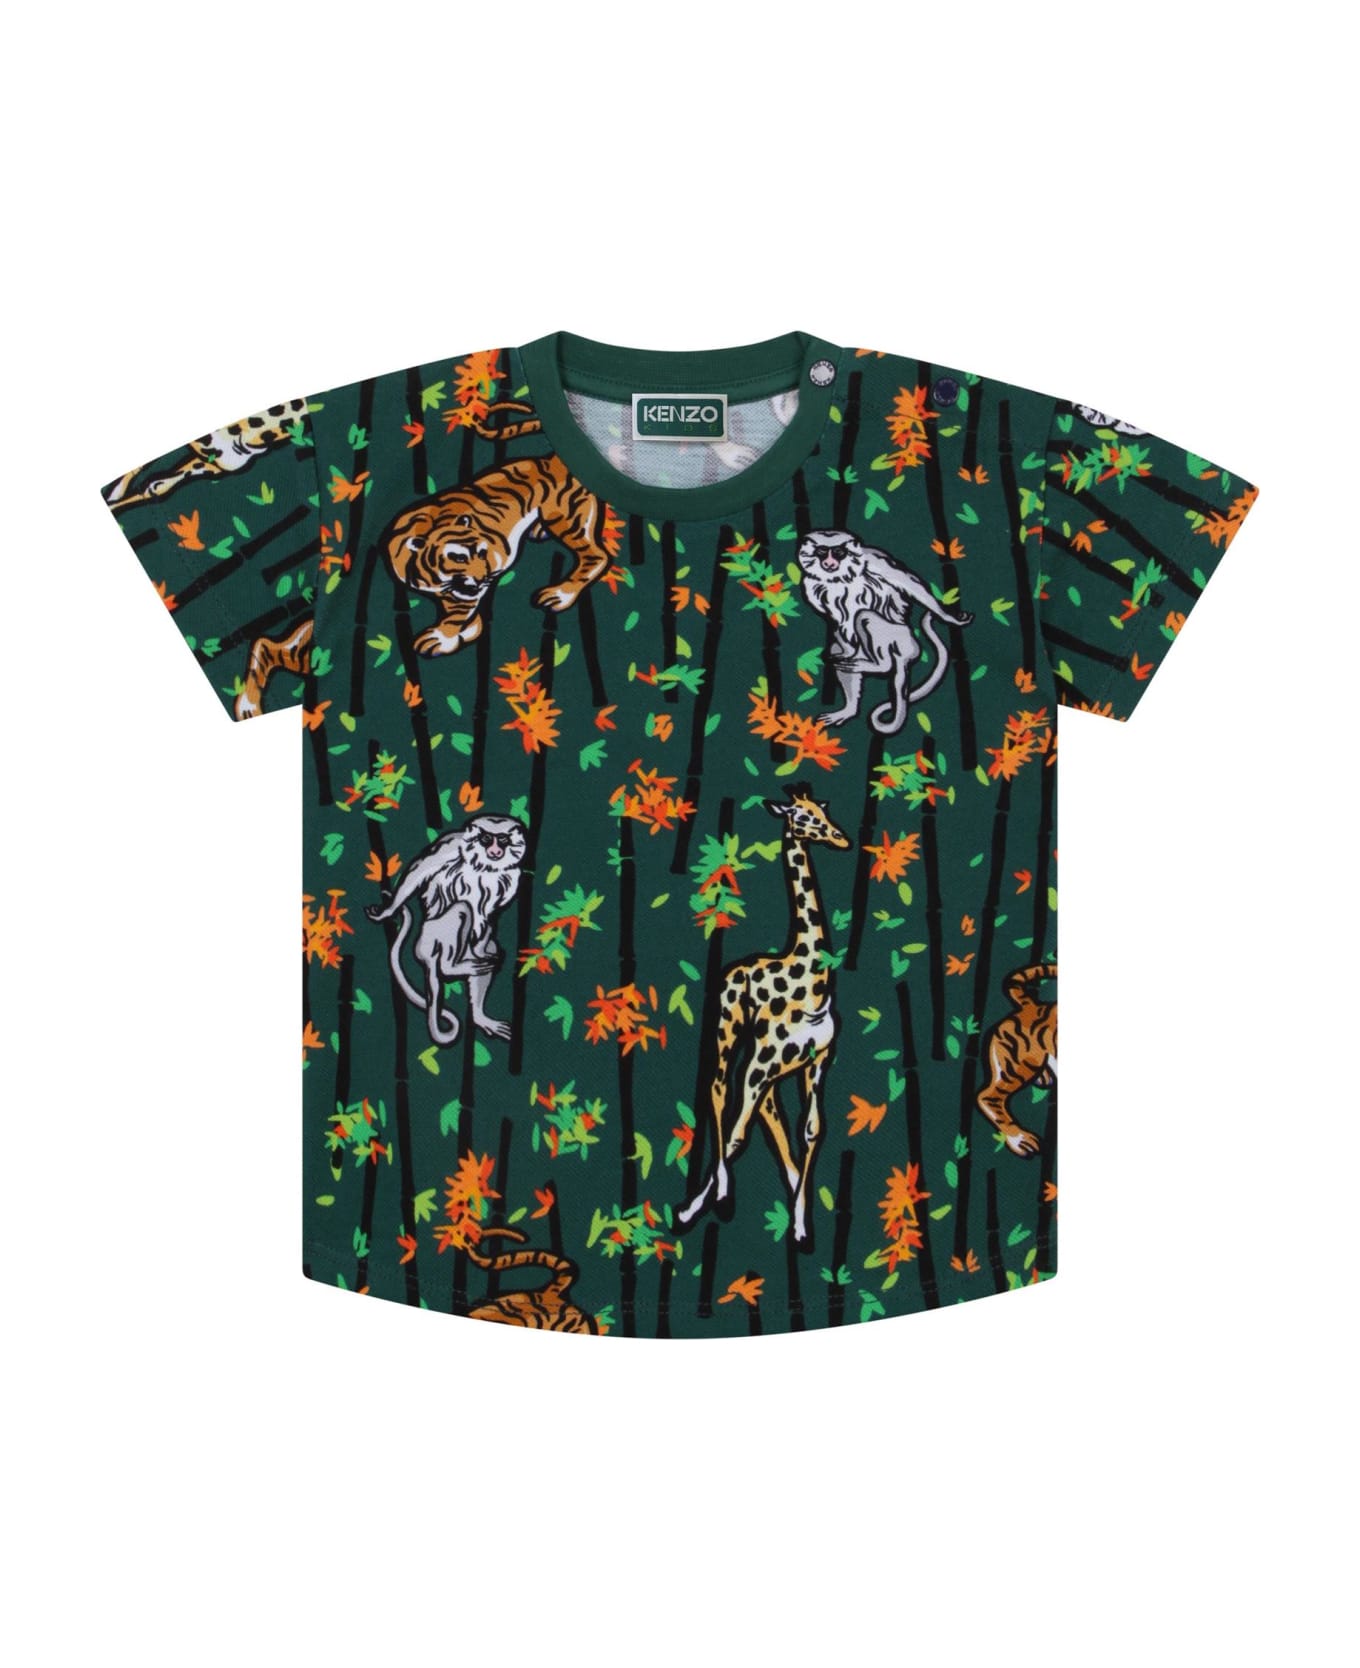 Kenzo Kids Green T-shirt With All-over Jungle Print - Green